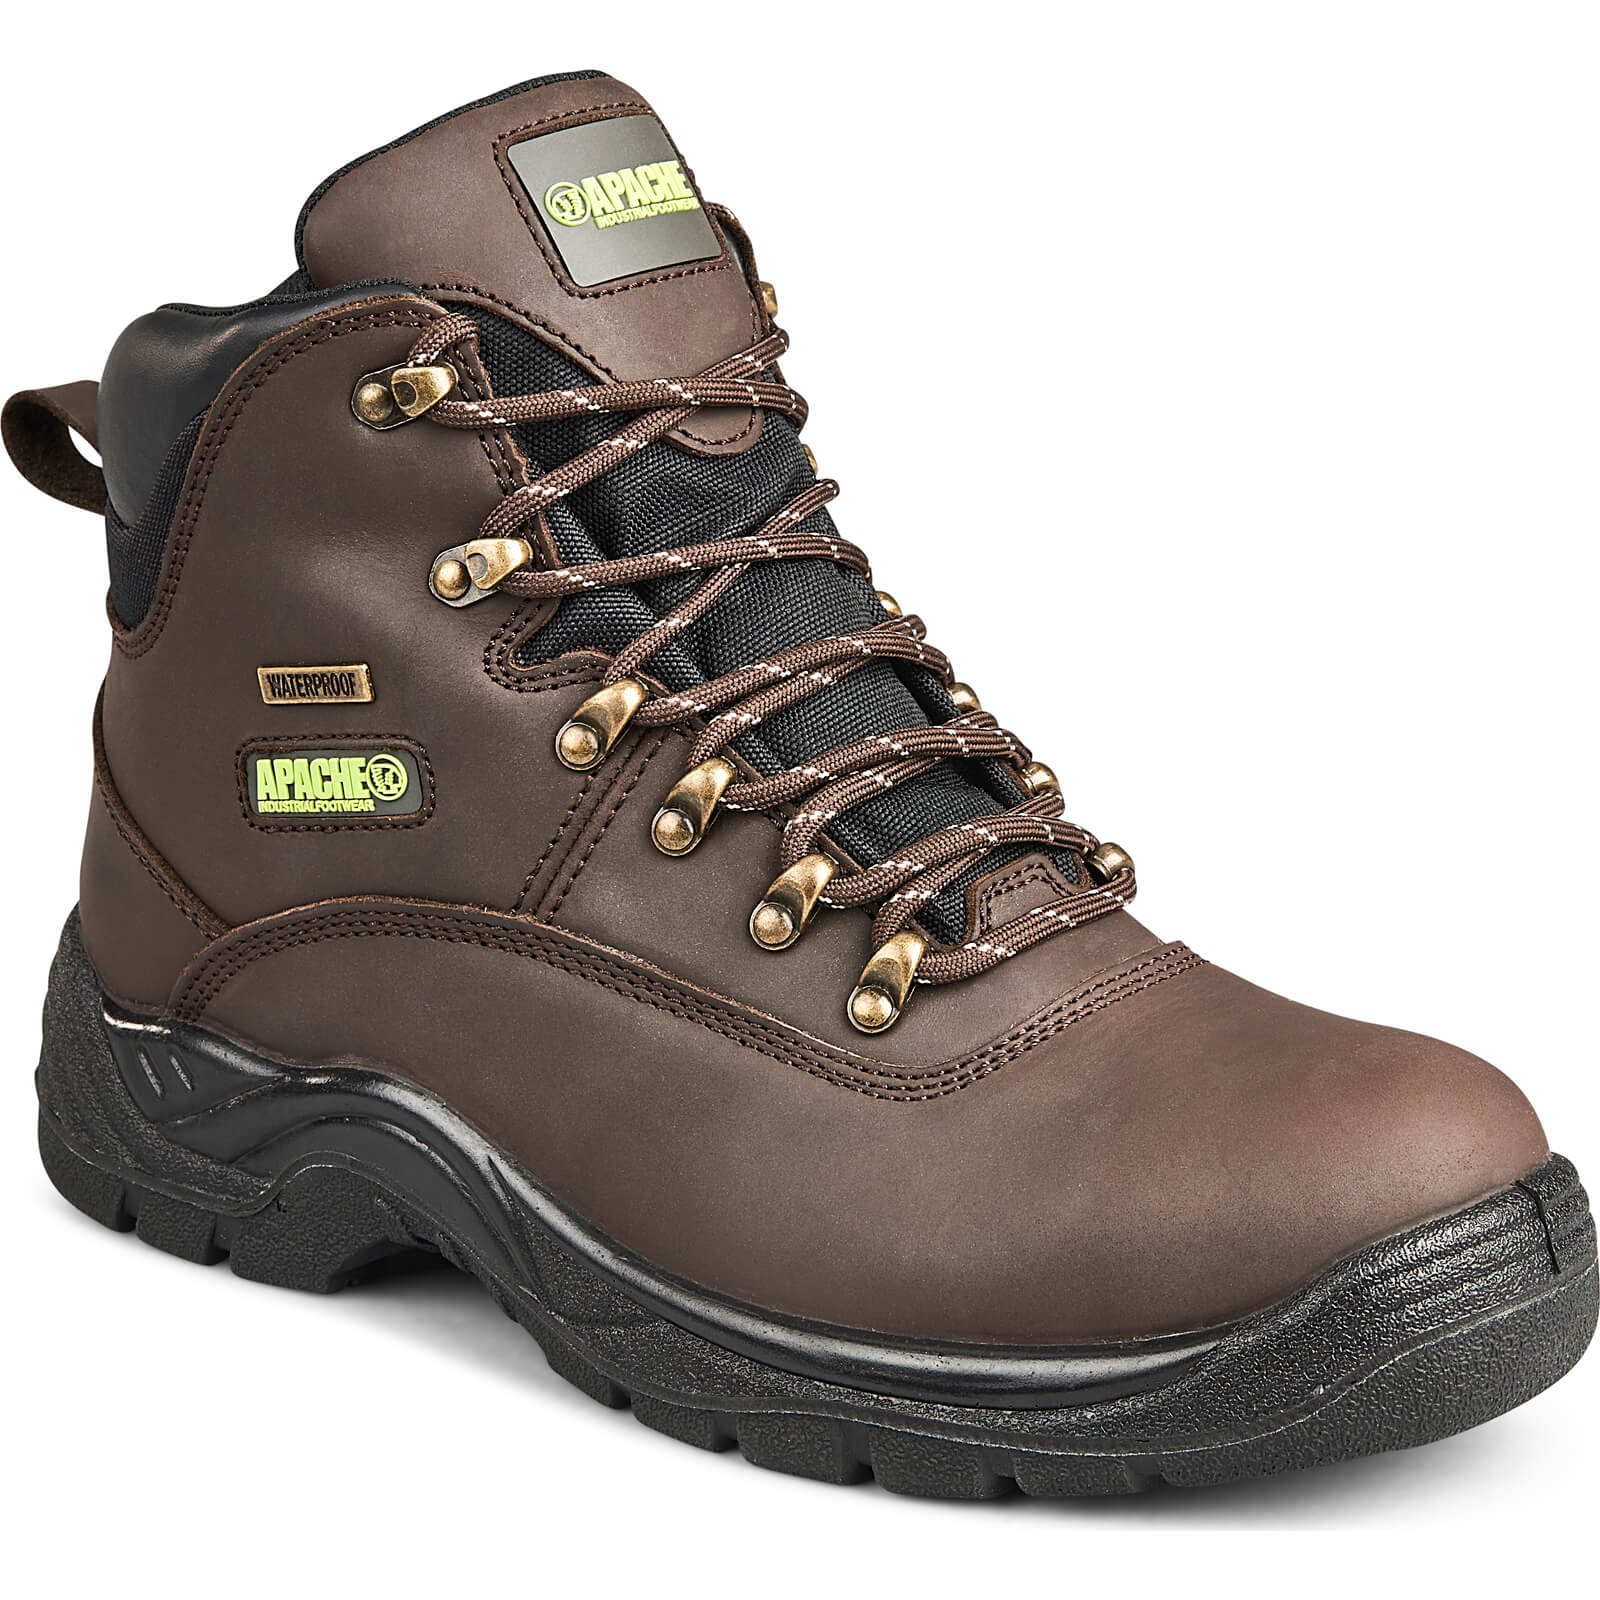 Image of Apache SS81 Waterproof Safety Hiker Boots Brown Size 7